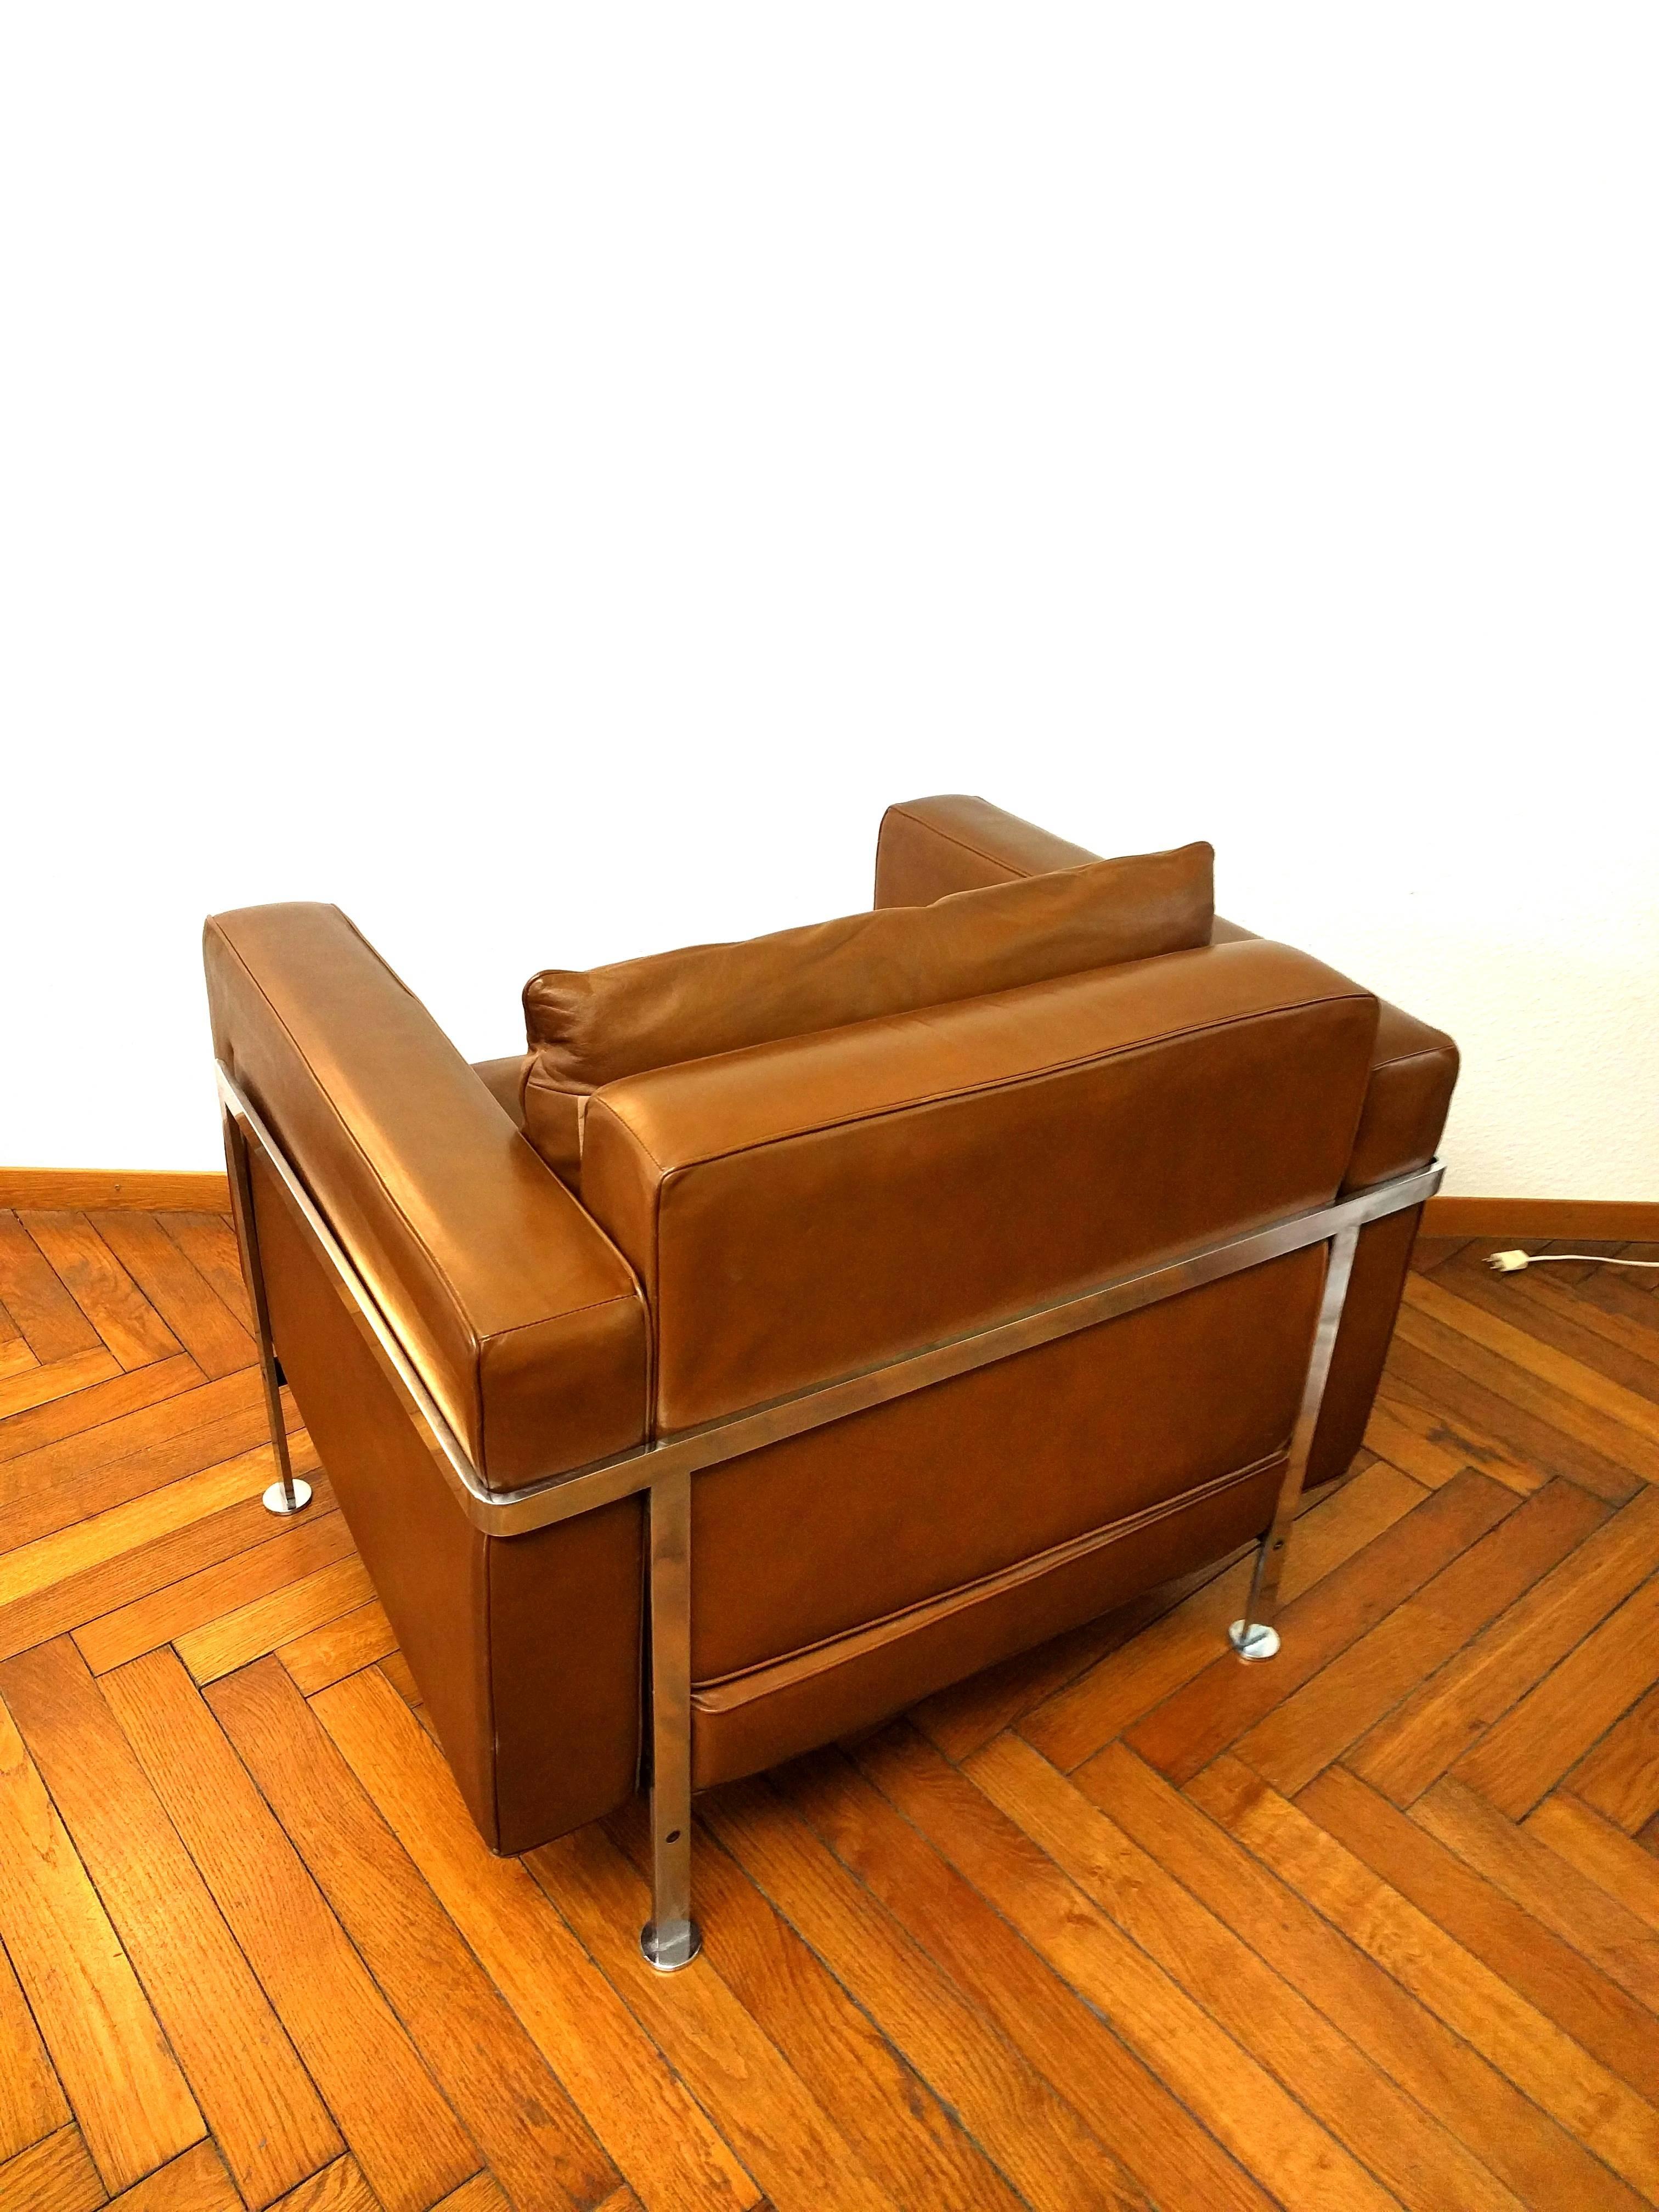 Very nice club chair, made with high quality leather and chromed steel by De Sede in Switzerland.